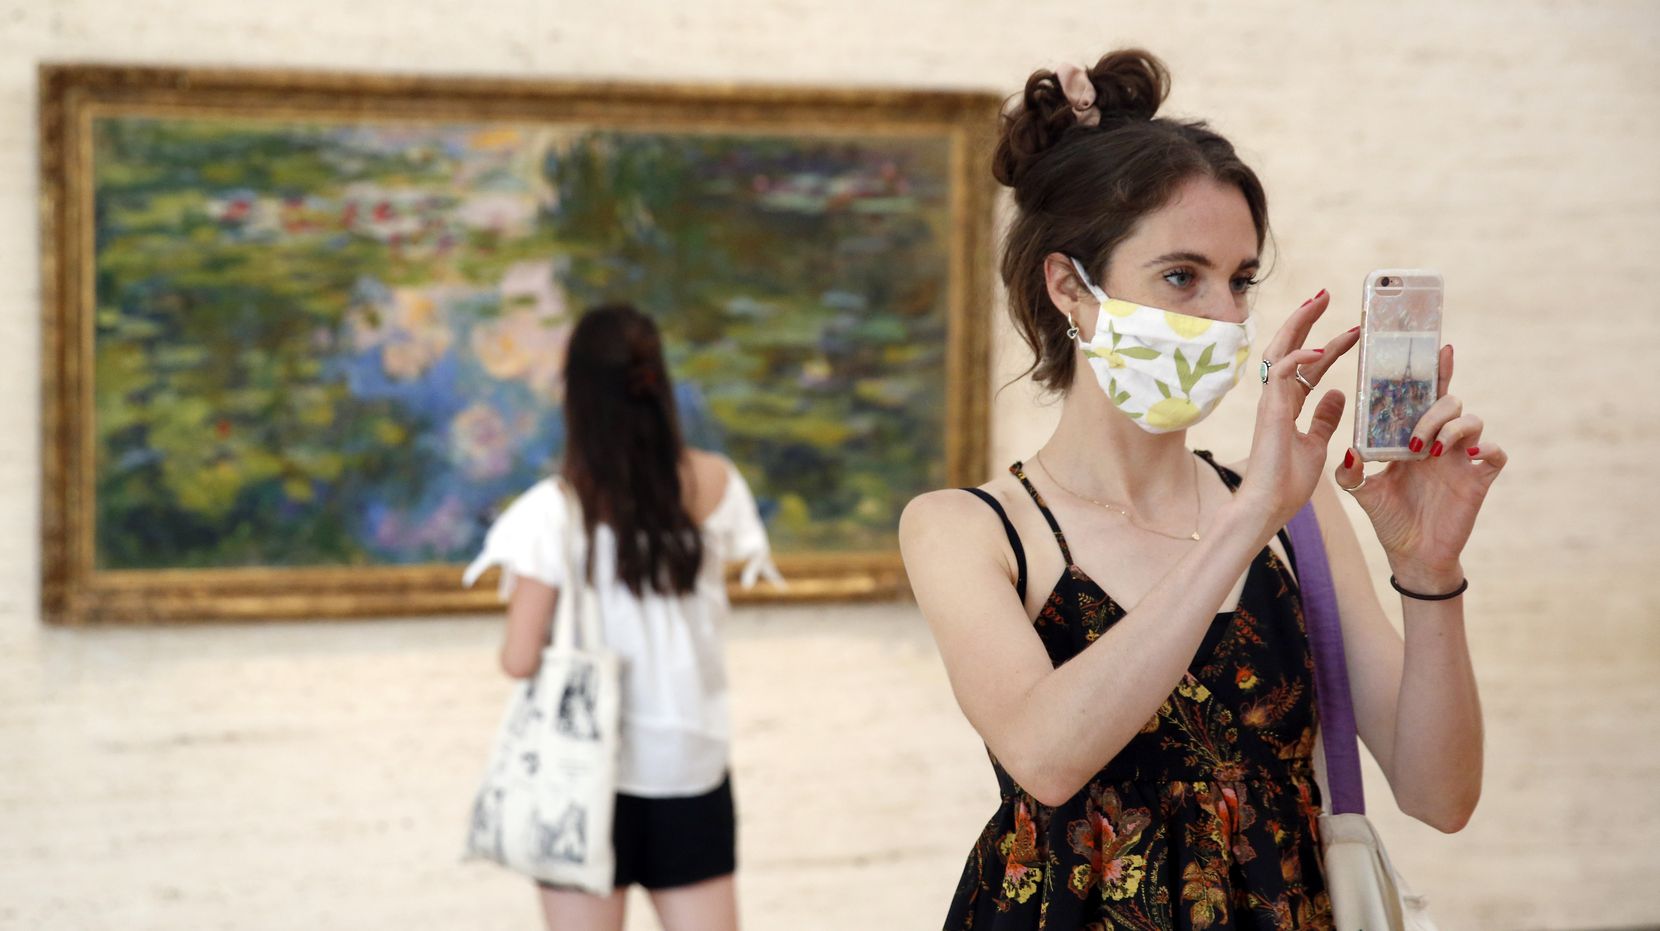 Libby Krueger of Fort Worth takes a photo of paintings in the Kimbell Art Museum as her...